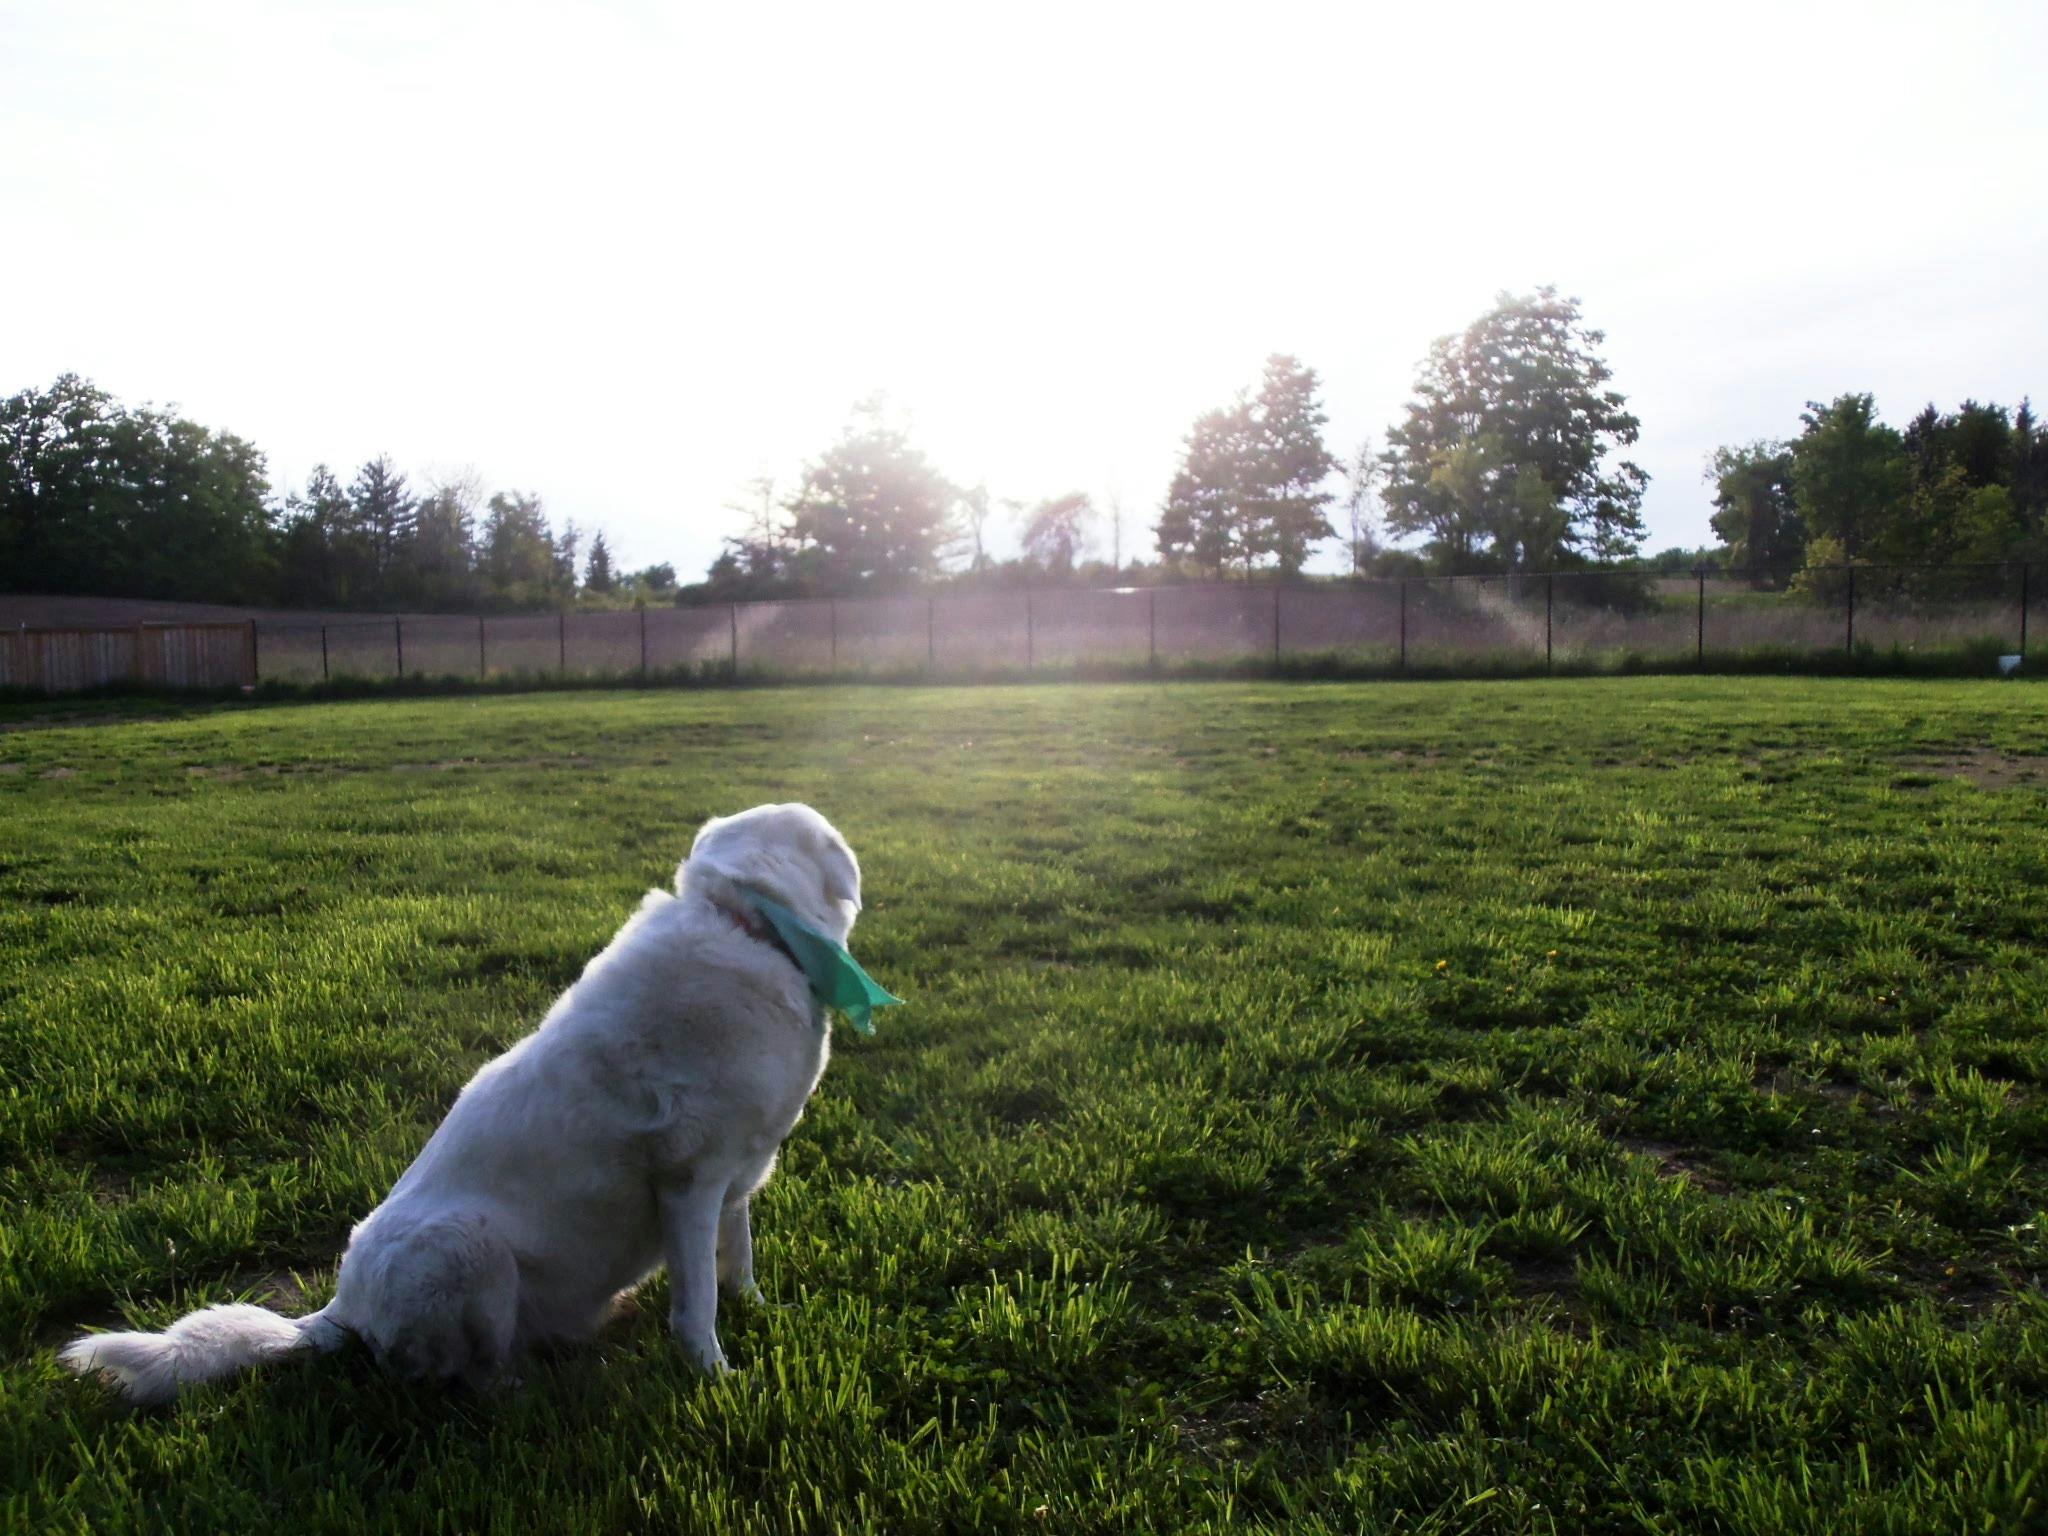 At Northside, we're proud to have Halton's largest outdoor gated play area for dogs. With options ranging from cozy 80' x 80' spots to vast 500' x 500' fields, we've got the perfect space for every pup, whether they love to sprint, play, or just bask in the sunshine. Here, every dog finds their slice of heaven to frolic and relax.